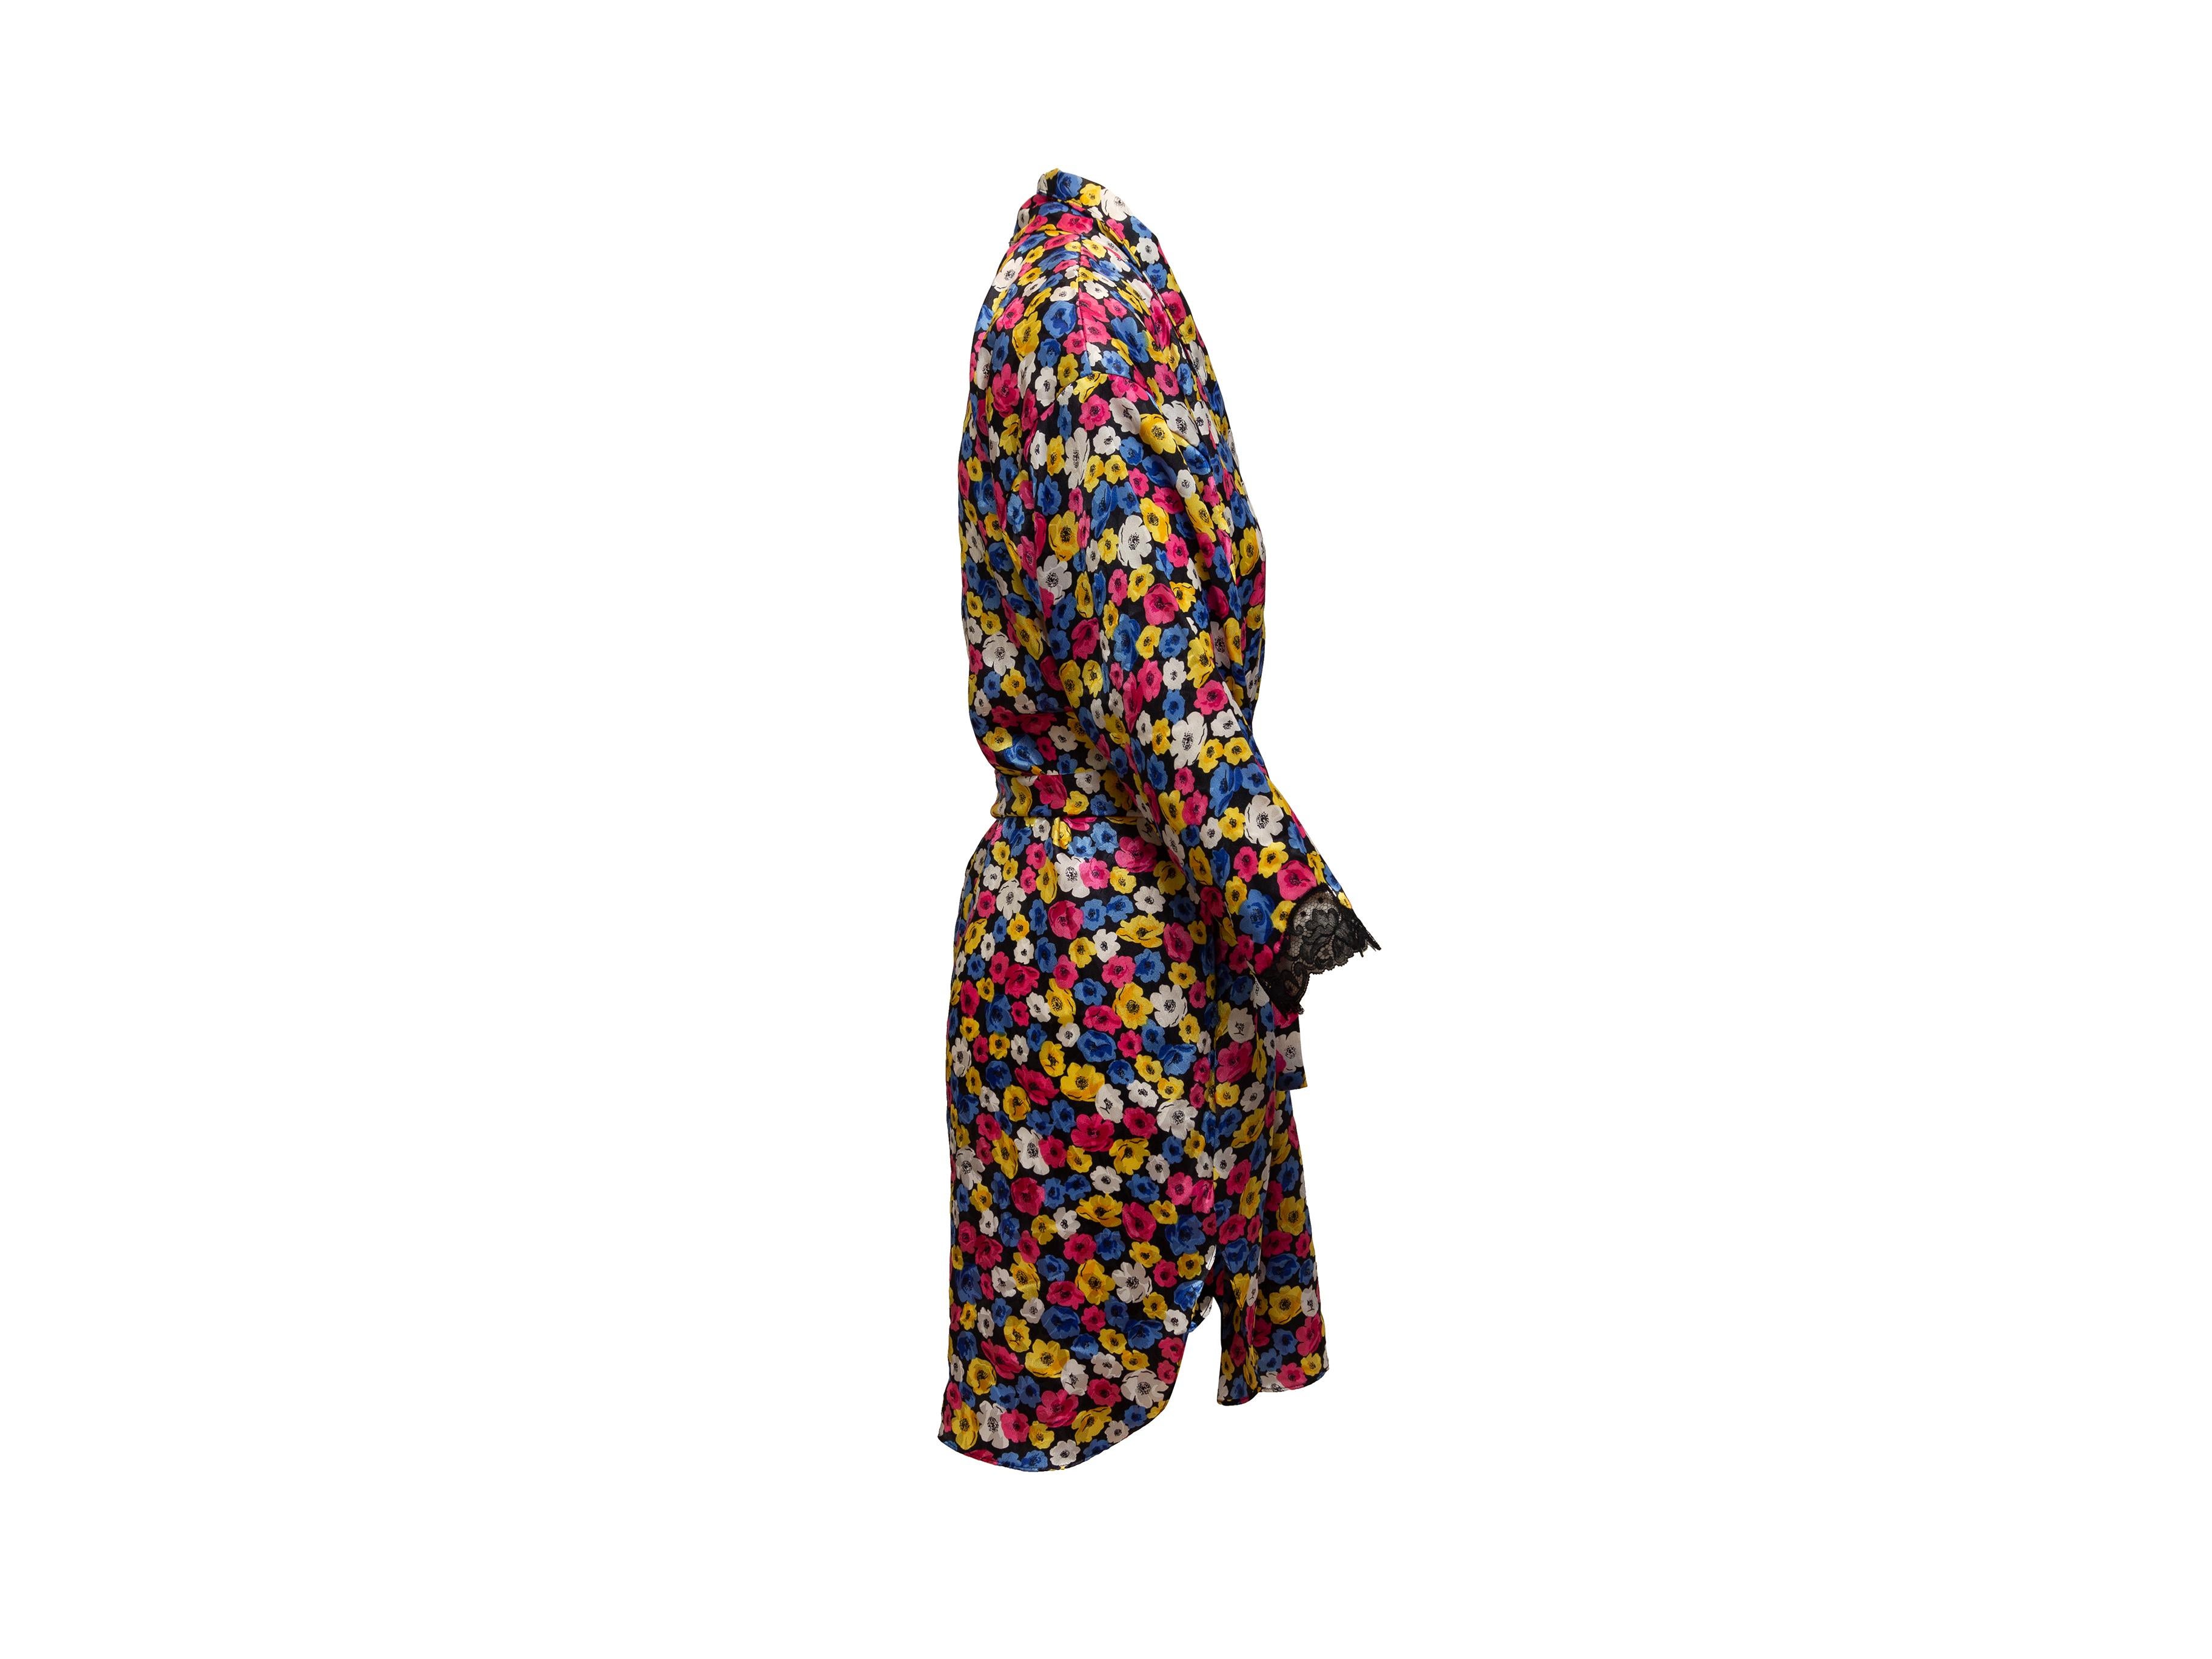 Product details: Vintage black and multicolor floral print robe by Christian Dior. Lace trim at cuffs. Tie closure at waist. 38